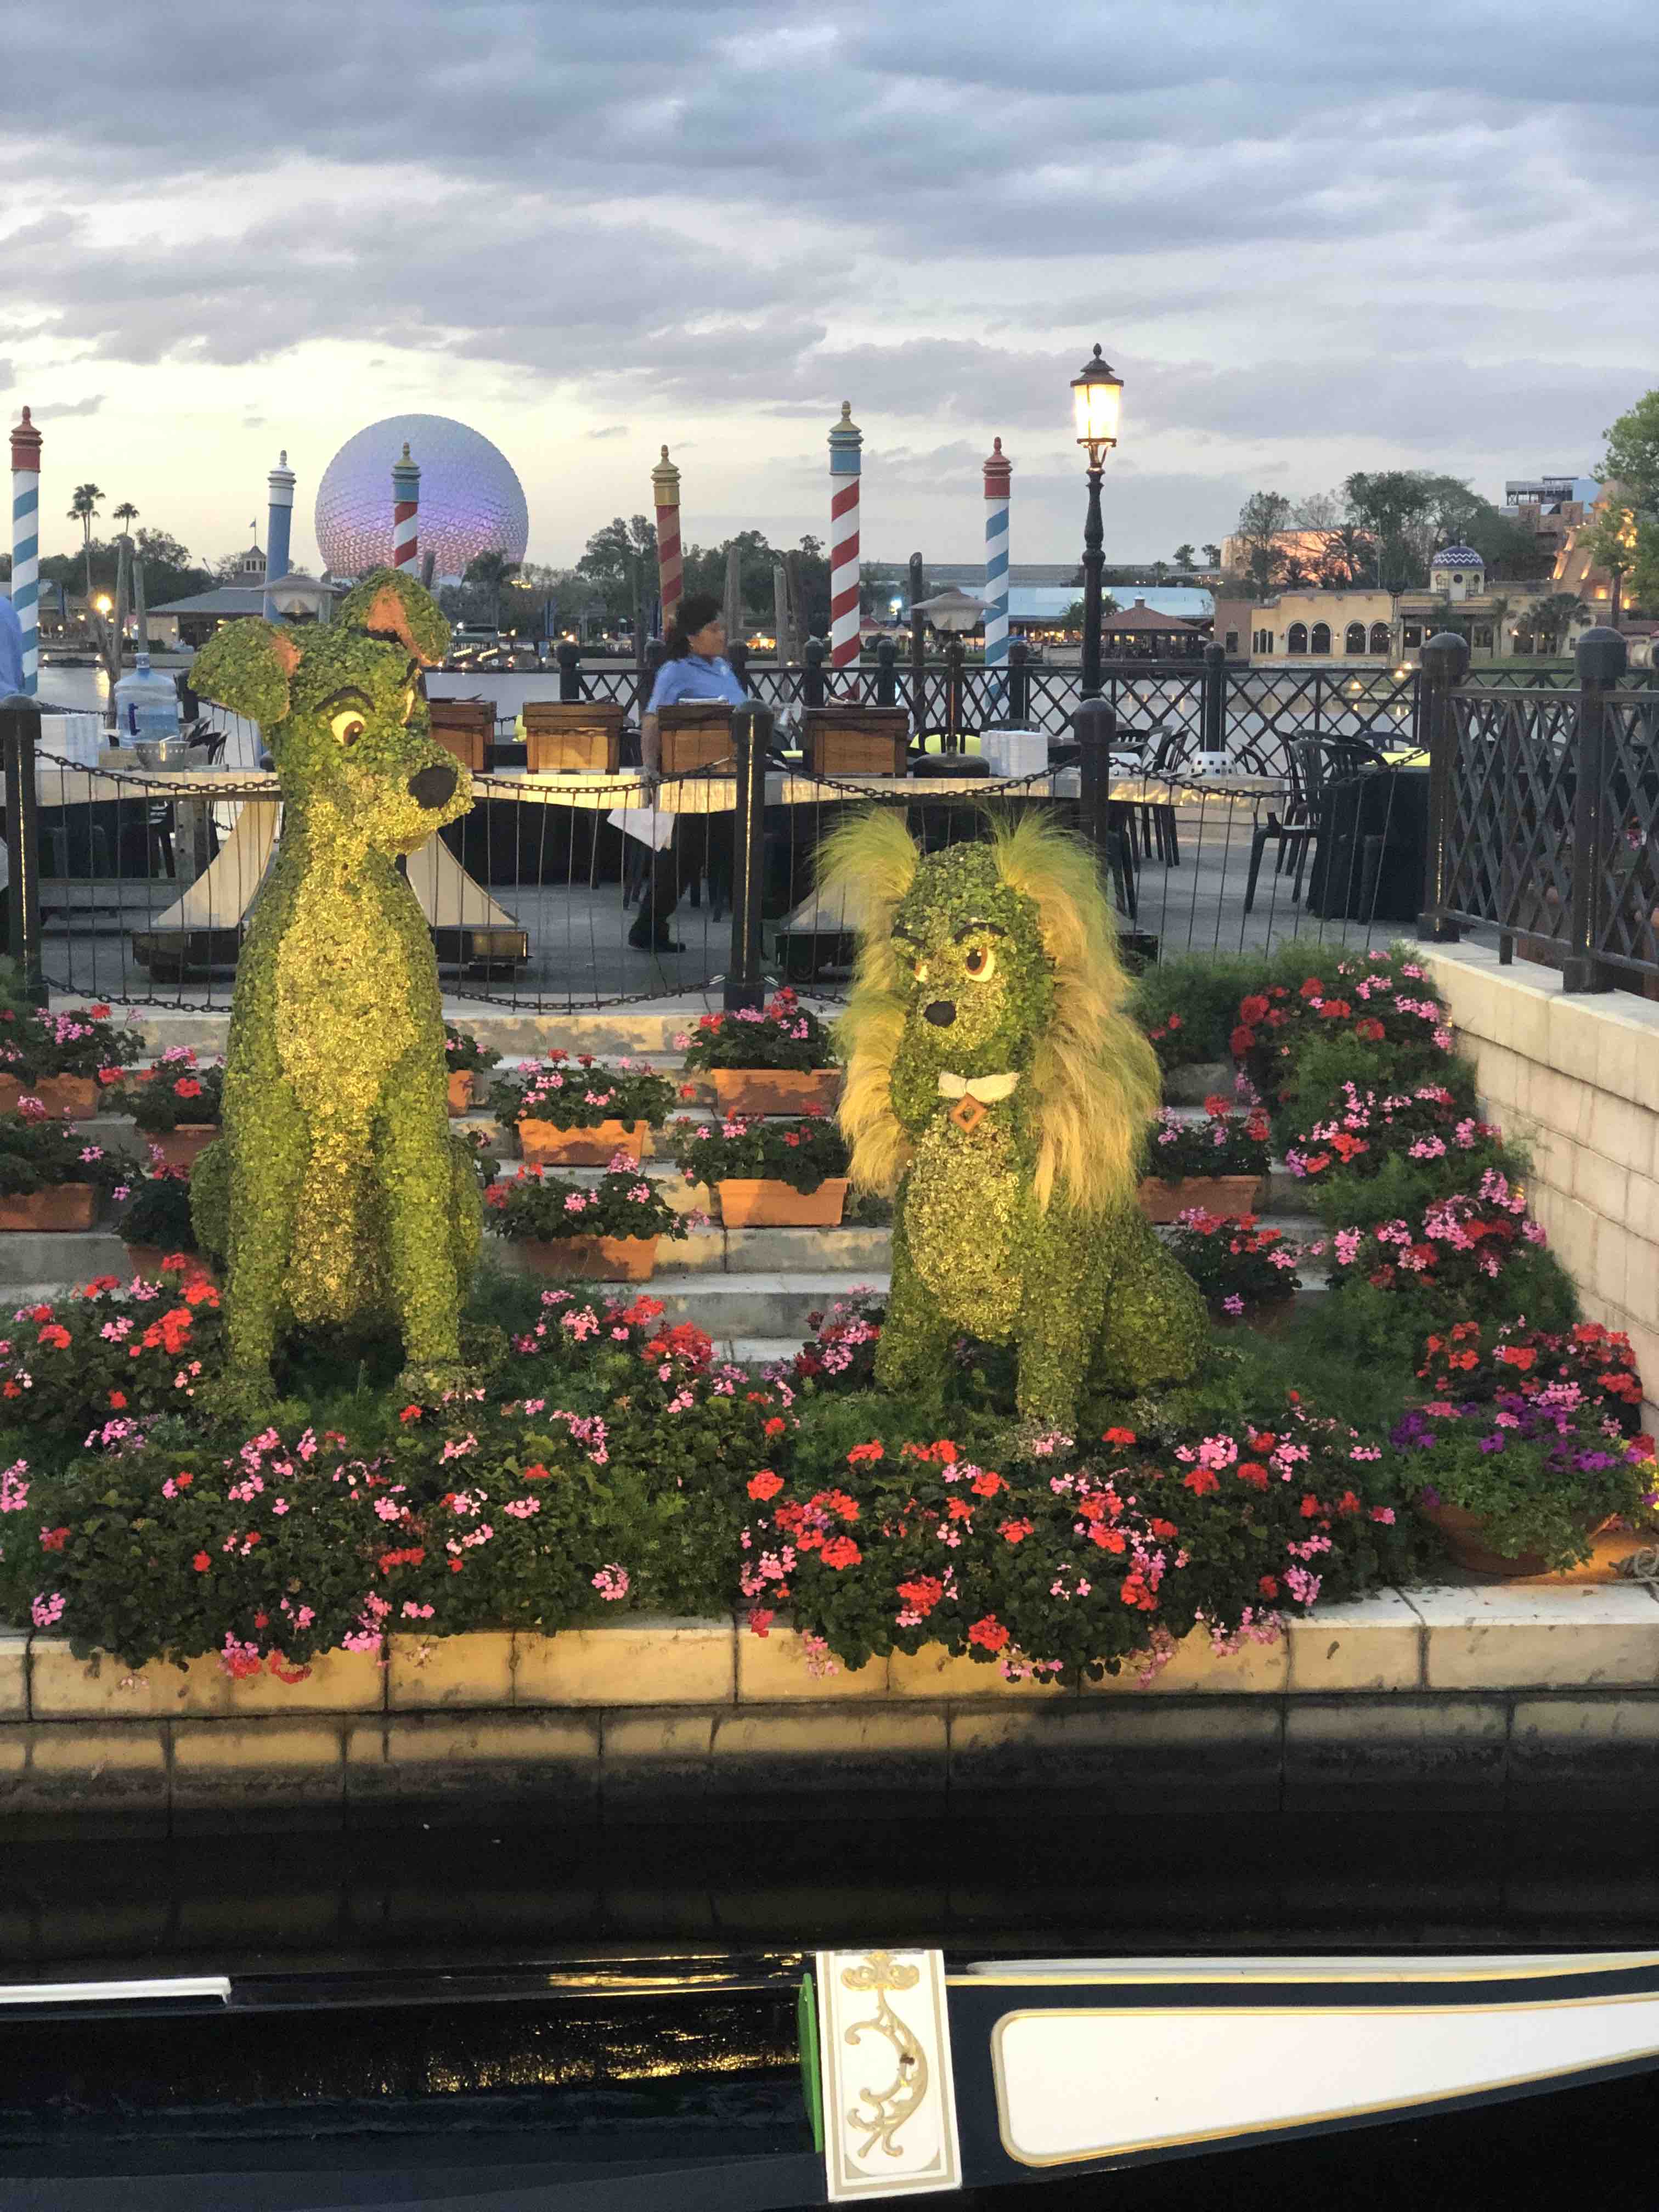 At Epcot International Flower & Garden Festival, Lady and the Tramp shrubs with Lady (right) looking up at Tramp (left) with her eyes as he looks back down at her. Surrounded by pink and red flowers during the daytime with the infamous Epcot ball in the distance.